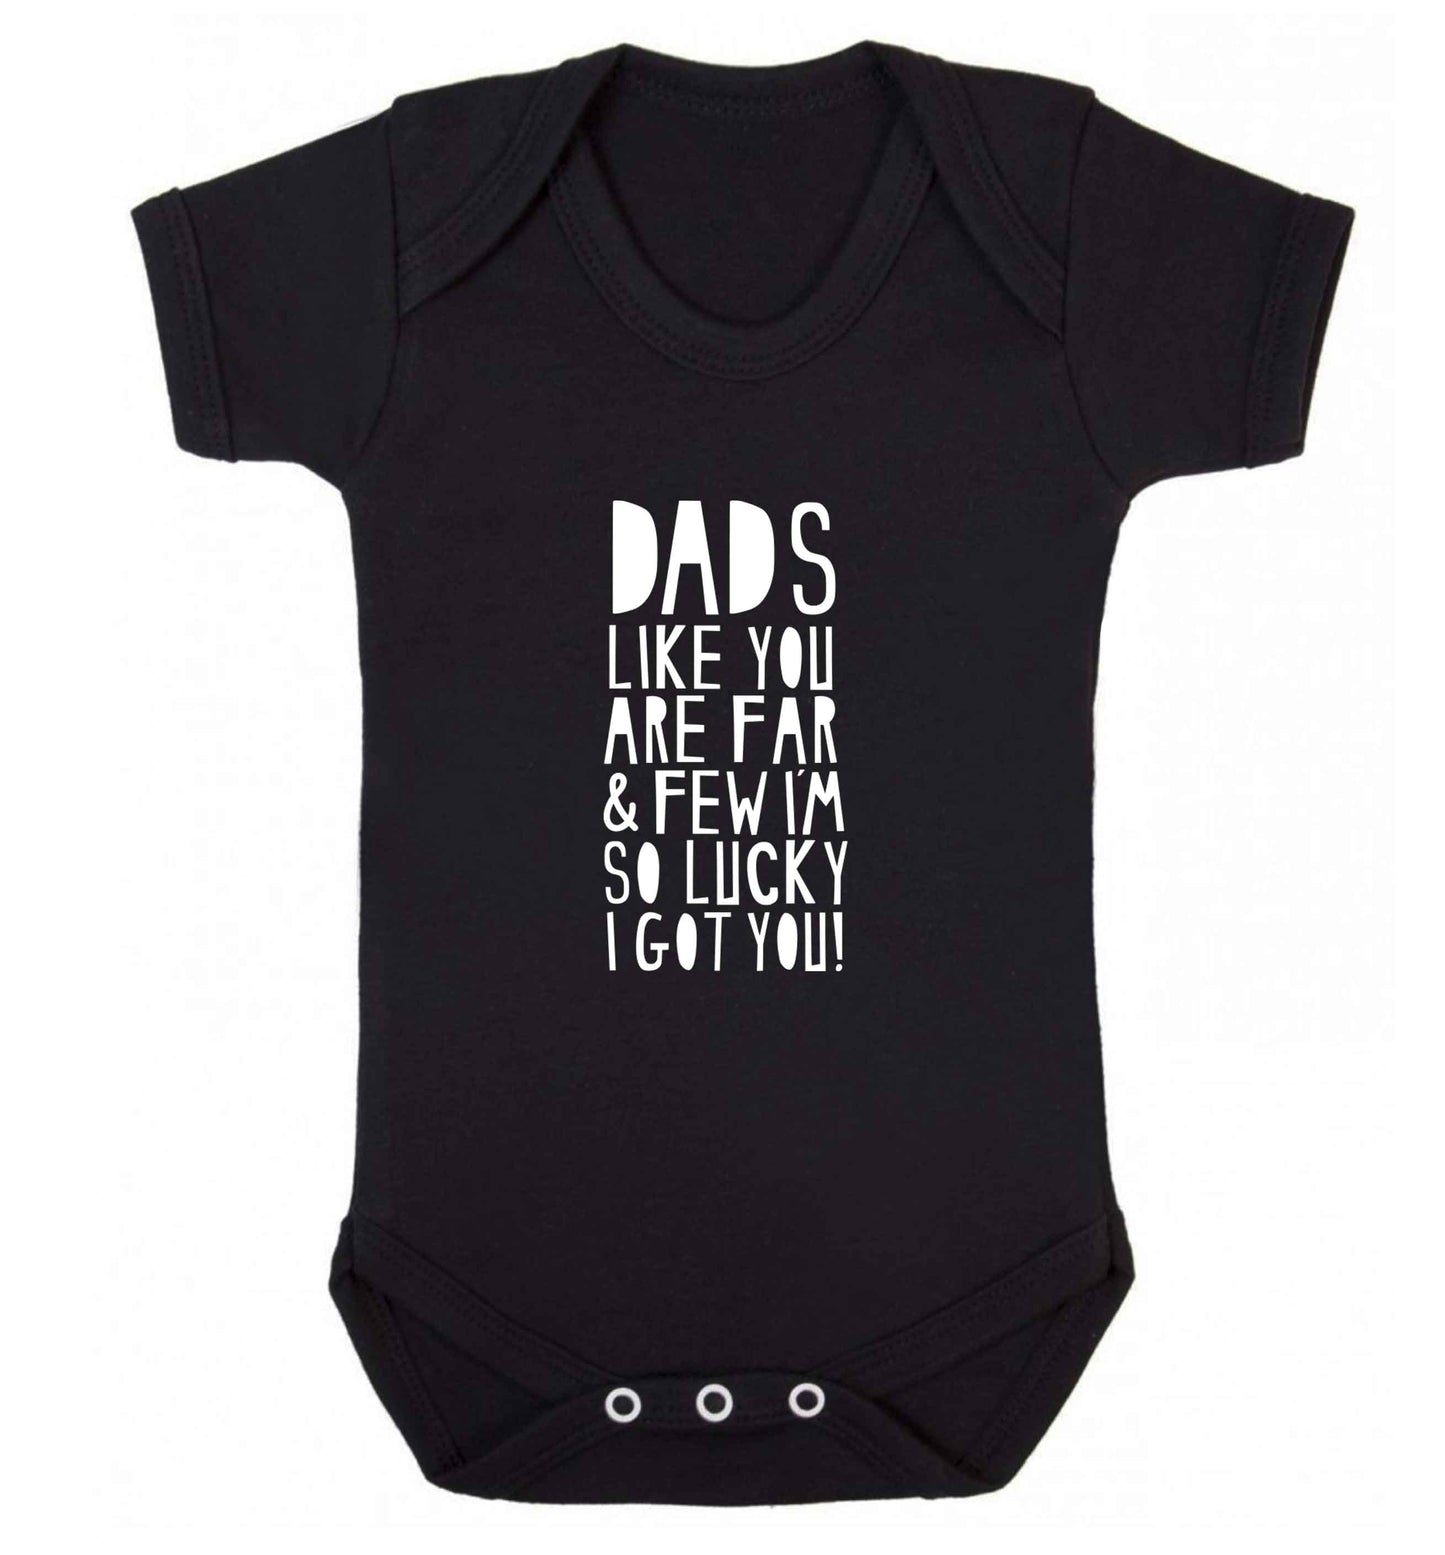 Dads like you are far and few I'm so luck I got you! baby vest black 18-24 months